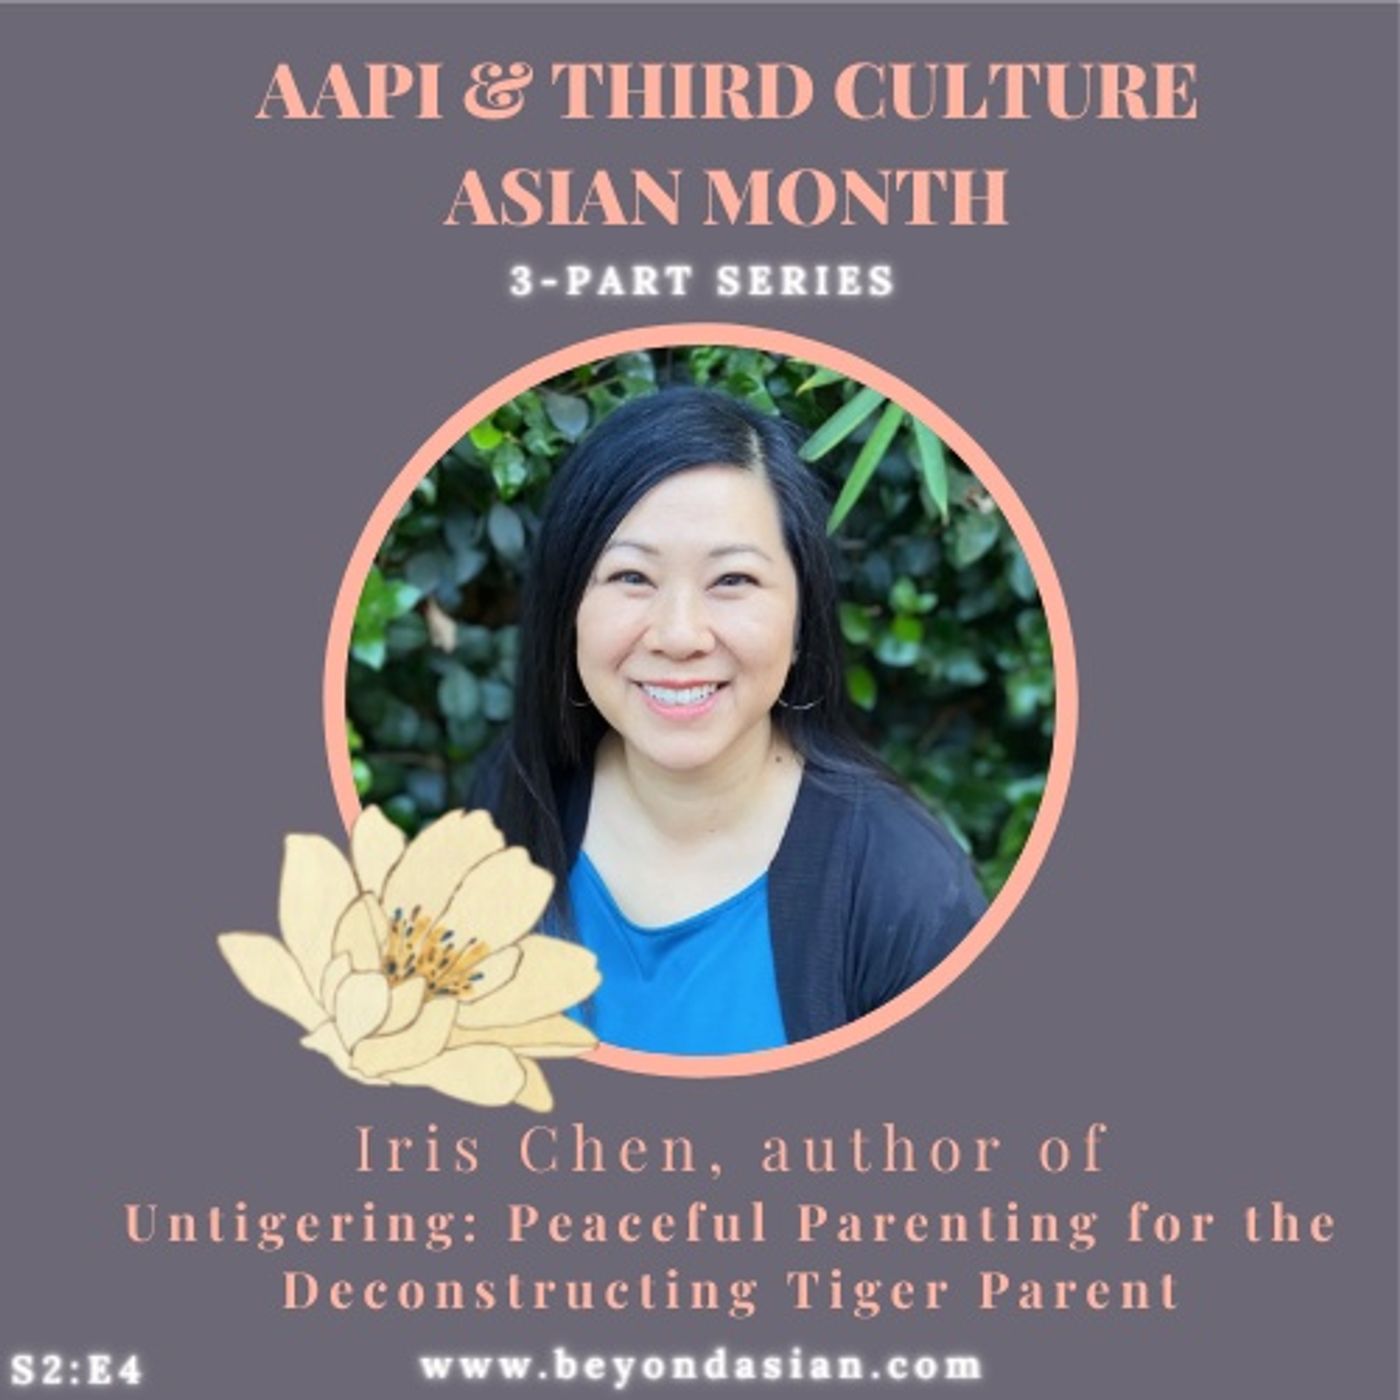 S2 | E4 – Iris Chen, author of “Untigering: Peaceful Parenting for the Deconstructing Tiger Parent” (AAPI & TCA Month 3-part series)